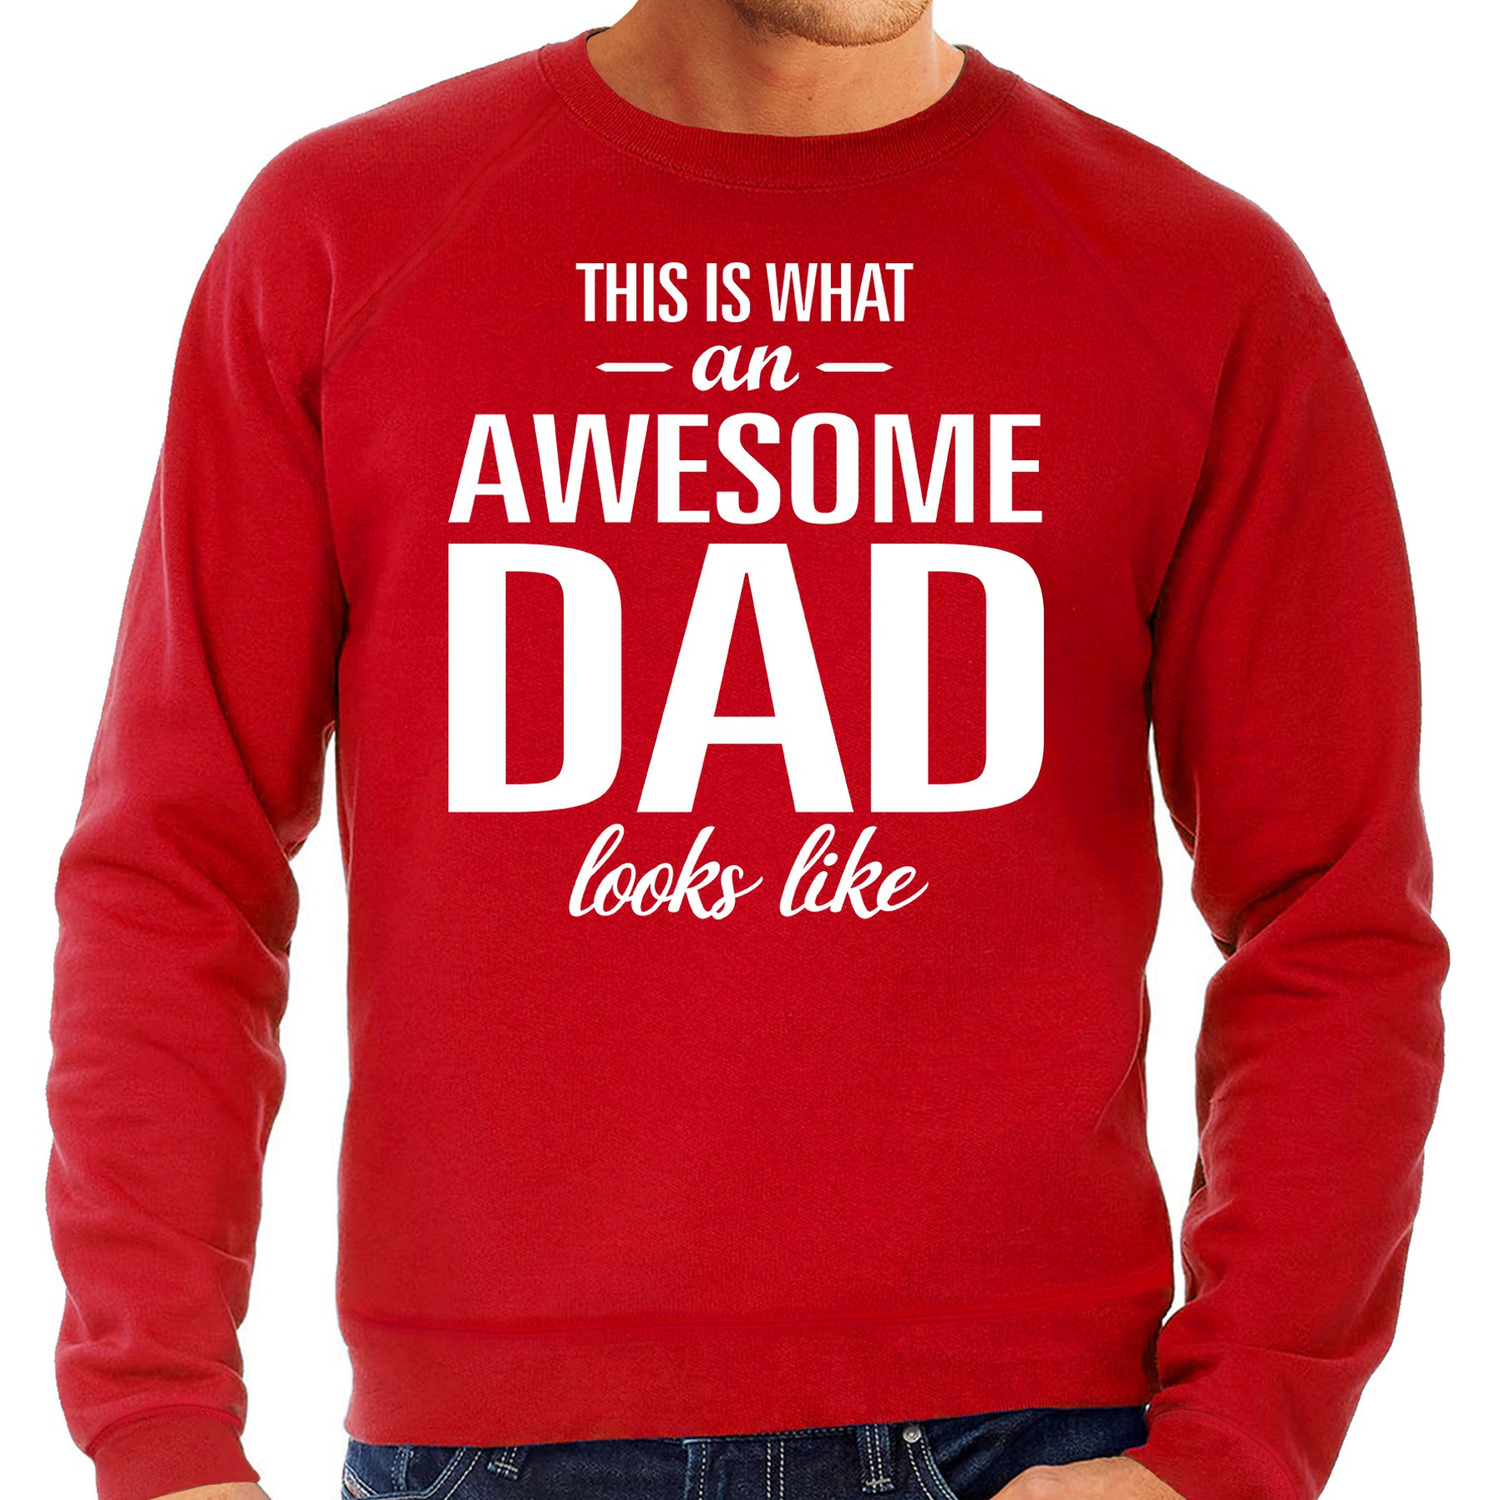 Awesome Dad cadeau sweater rood heren - Vaderdag cadeau